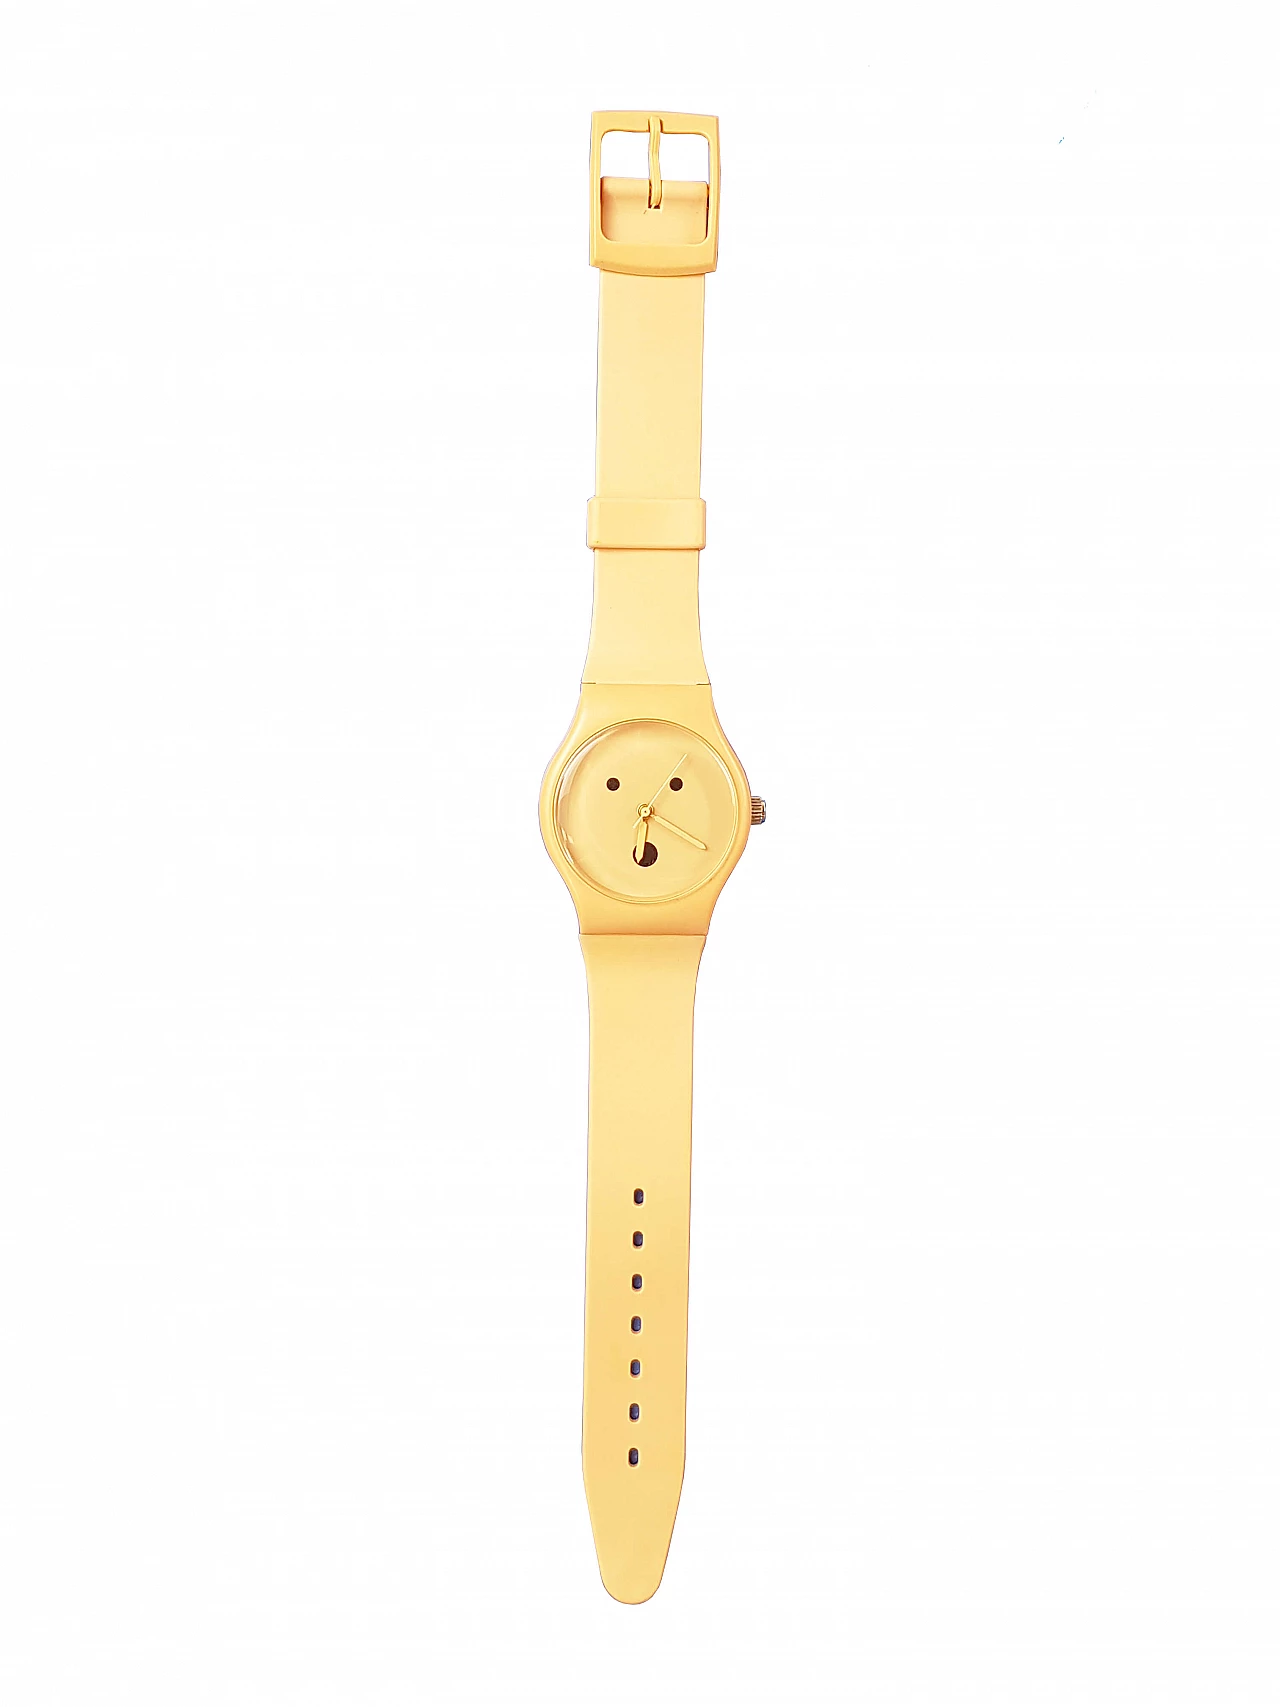 Plastic and rubber wristwatch by A. Mendini for Museo Alchimia, 1990s 2